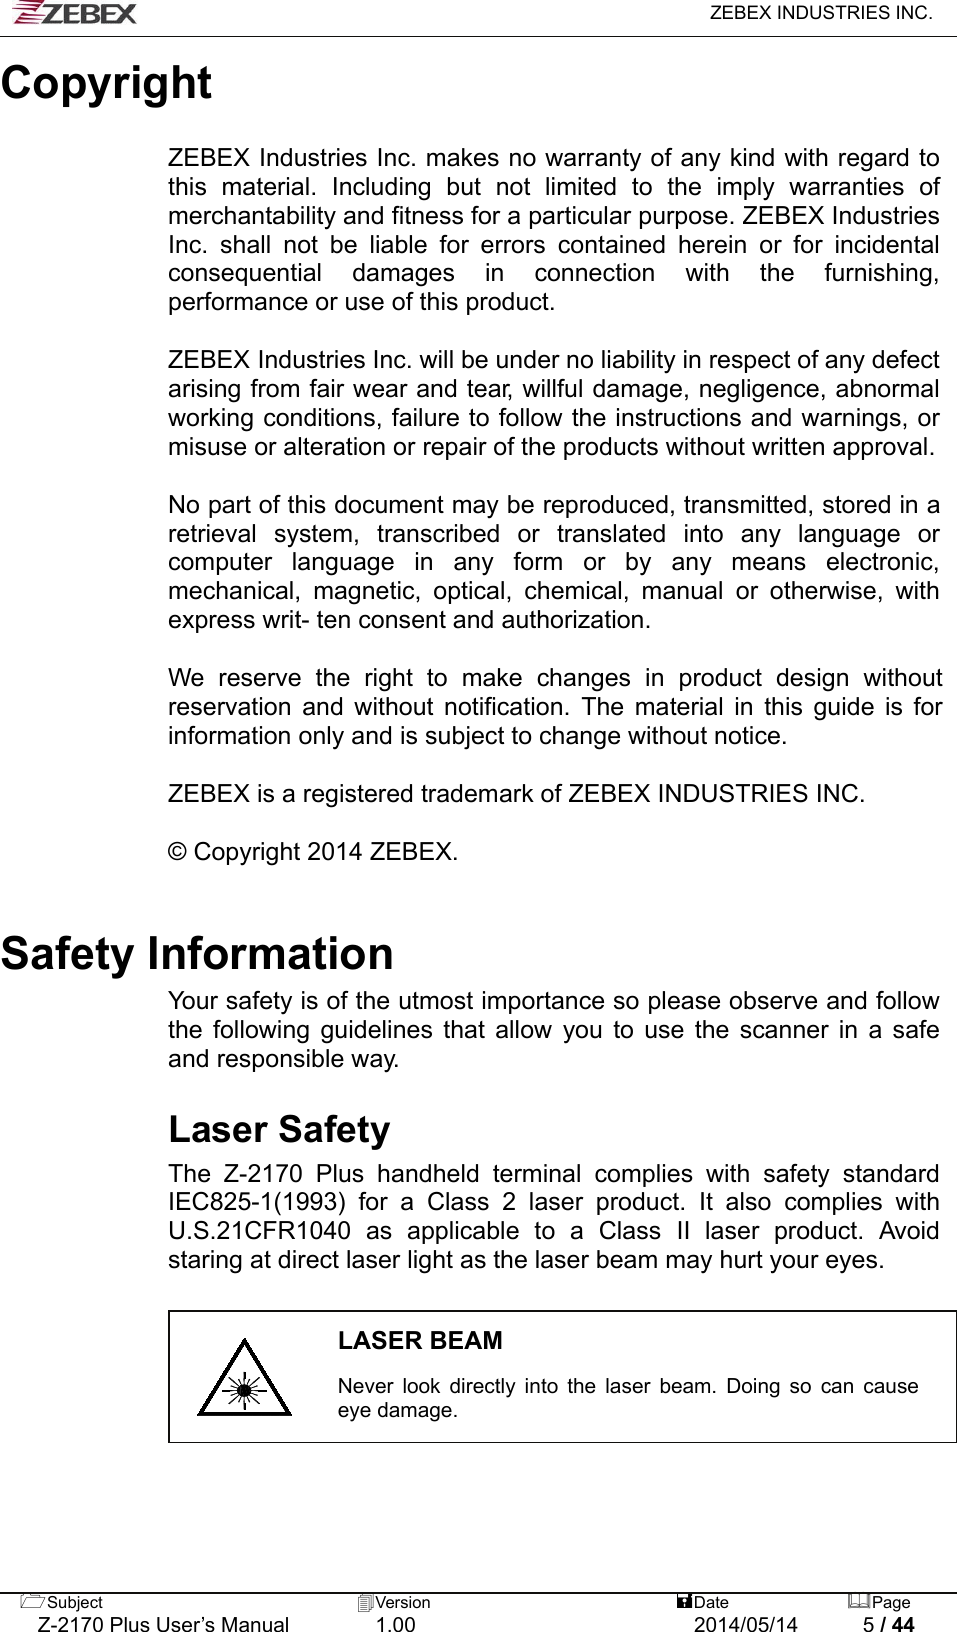   ZEBEX INDUSTRIES INC.  Subject  Version   DatePage   Z-2170 Plus User’s Manual  1.00  2014/05/14  5 / 44 Copyright  ZEBEX Industries Inc. makes no warranty of any kind with regard to this material. Including but not limited to the imply warranties of merchantability and fitness for a particular purpose. ZEBEX Industries Inc. shall not be liable for errors contained herein or for incidental consequential damages in connection with the furnishing, performance or use of this product.  ZEBEX Industries Inc. will be under no liability in respect of any defect arising from fair wear and tear, willful damage, negligence, abnormal working conditions, failure to follow the instructions and warnings, or misuse or alteration or repair of the products without written approval.  No part of this document may be reproduced, transmitted, stored in a retrieval system, transcribed or translated into any language or computer language in any form or by any means electronic, mechanical, magnetic, optical, chemical, manual or otherwise, with express writ- ten consent and authorization.  We reserve the right to make changes in product design without reservation and without notification. The material in this guide is for information only and is subject to change without notice.  ZEBEX is a registered trademark of ZEBEX INDUSTRIES INC.  © Copyright 2014 ZEBEX.    Safety Information Your safety is of the utmost importance so please observe and follow the following guidelines that allow you to use the scanner in a safe and responsible way.   Laser Safety The Z-2170 Plus handheld terminal complies with safety standard IEC825-1(1993) for a Class 2 laser product. It also complies with U.S.21CFR1040 as applicable to a Class II laser product. Avoid staring at direct laser light as the laser beam may hurt your eyes.   LASER BEAM  Never look directly into the laser beam. Doing so can cause eye damage.    